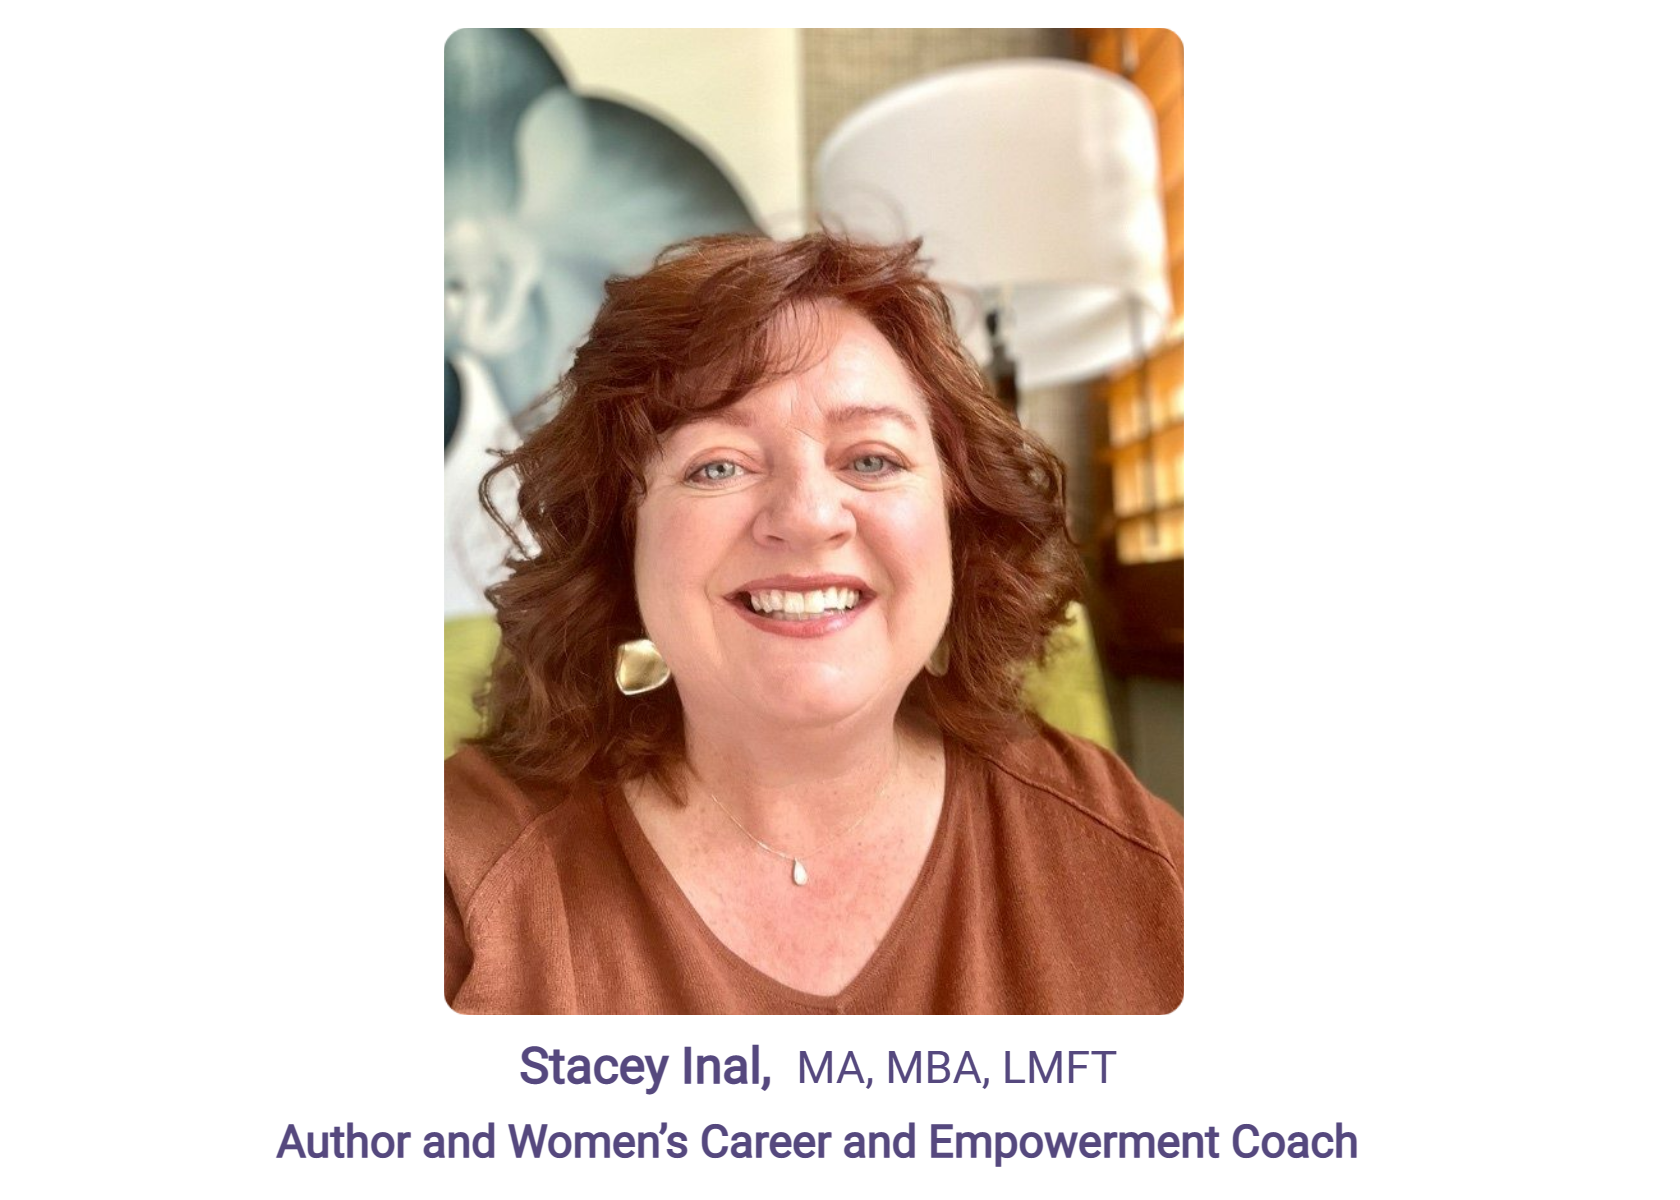 Author and Women’s Career and Empowerment Coach Stacey Inal. MA, MBA, LMFT